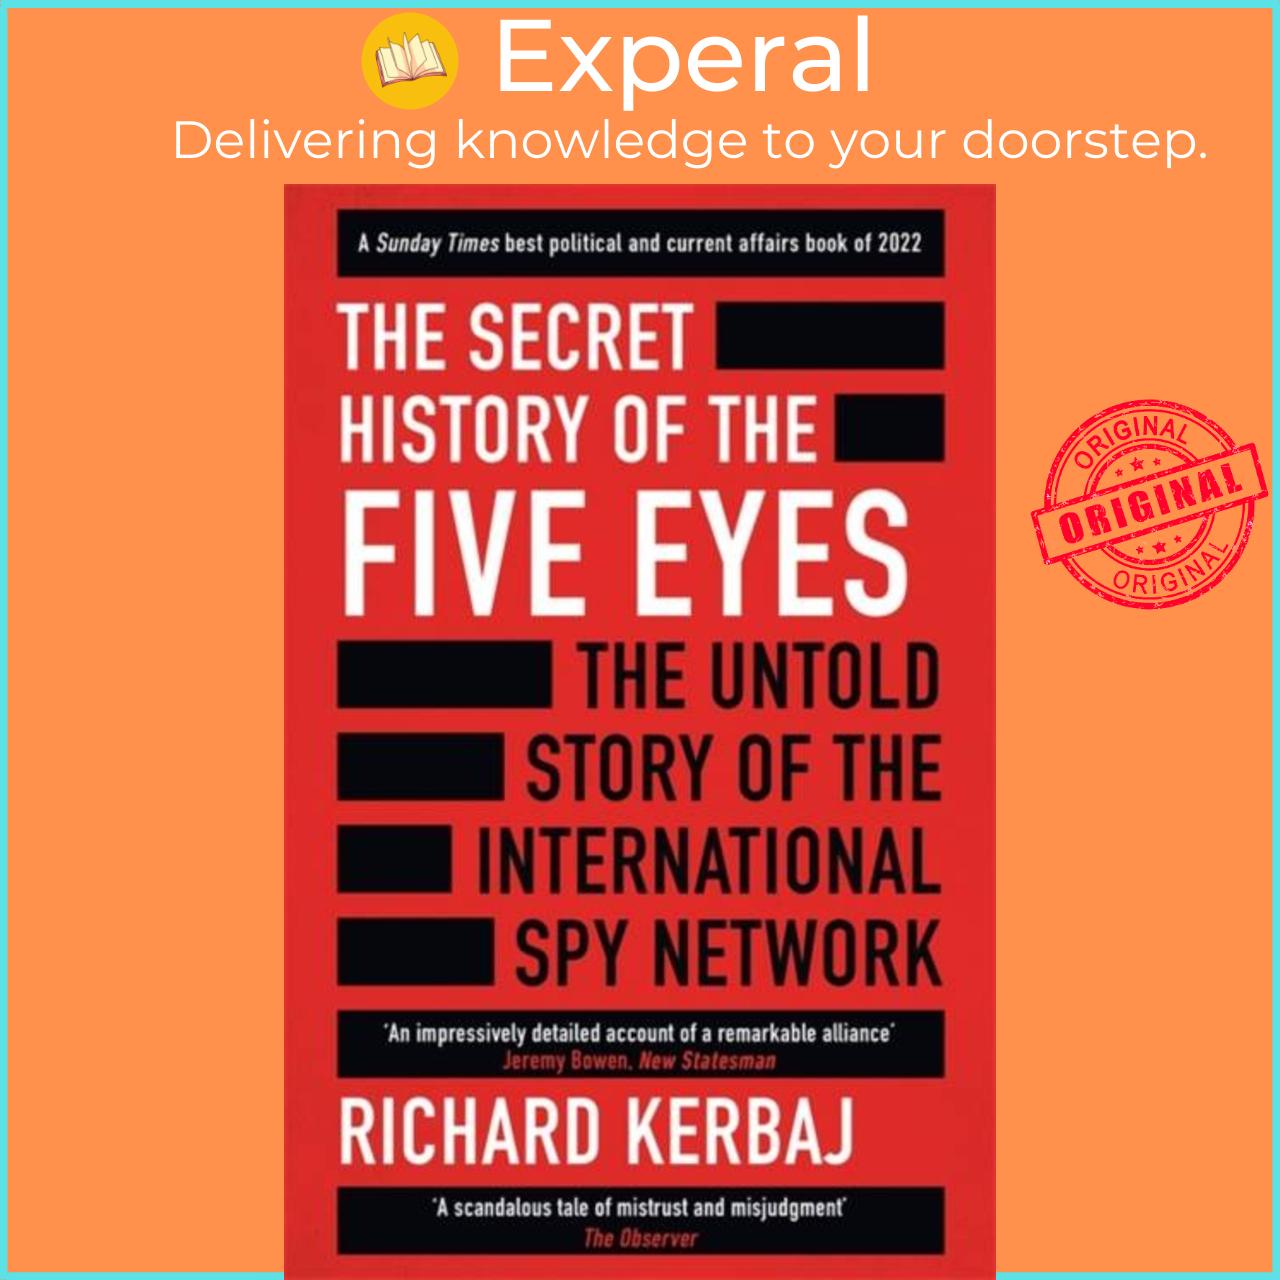 Sách - The Secret History of the Five Eyes - The untold story of the shadowy i by Richard Kerbaj (UK edition, paperback)